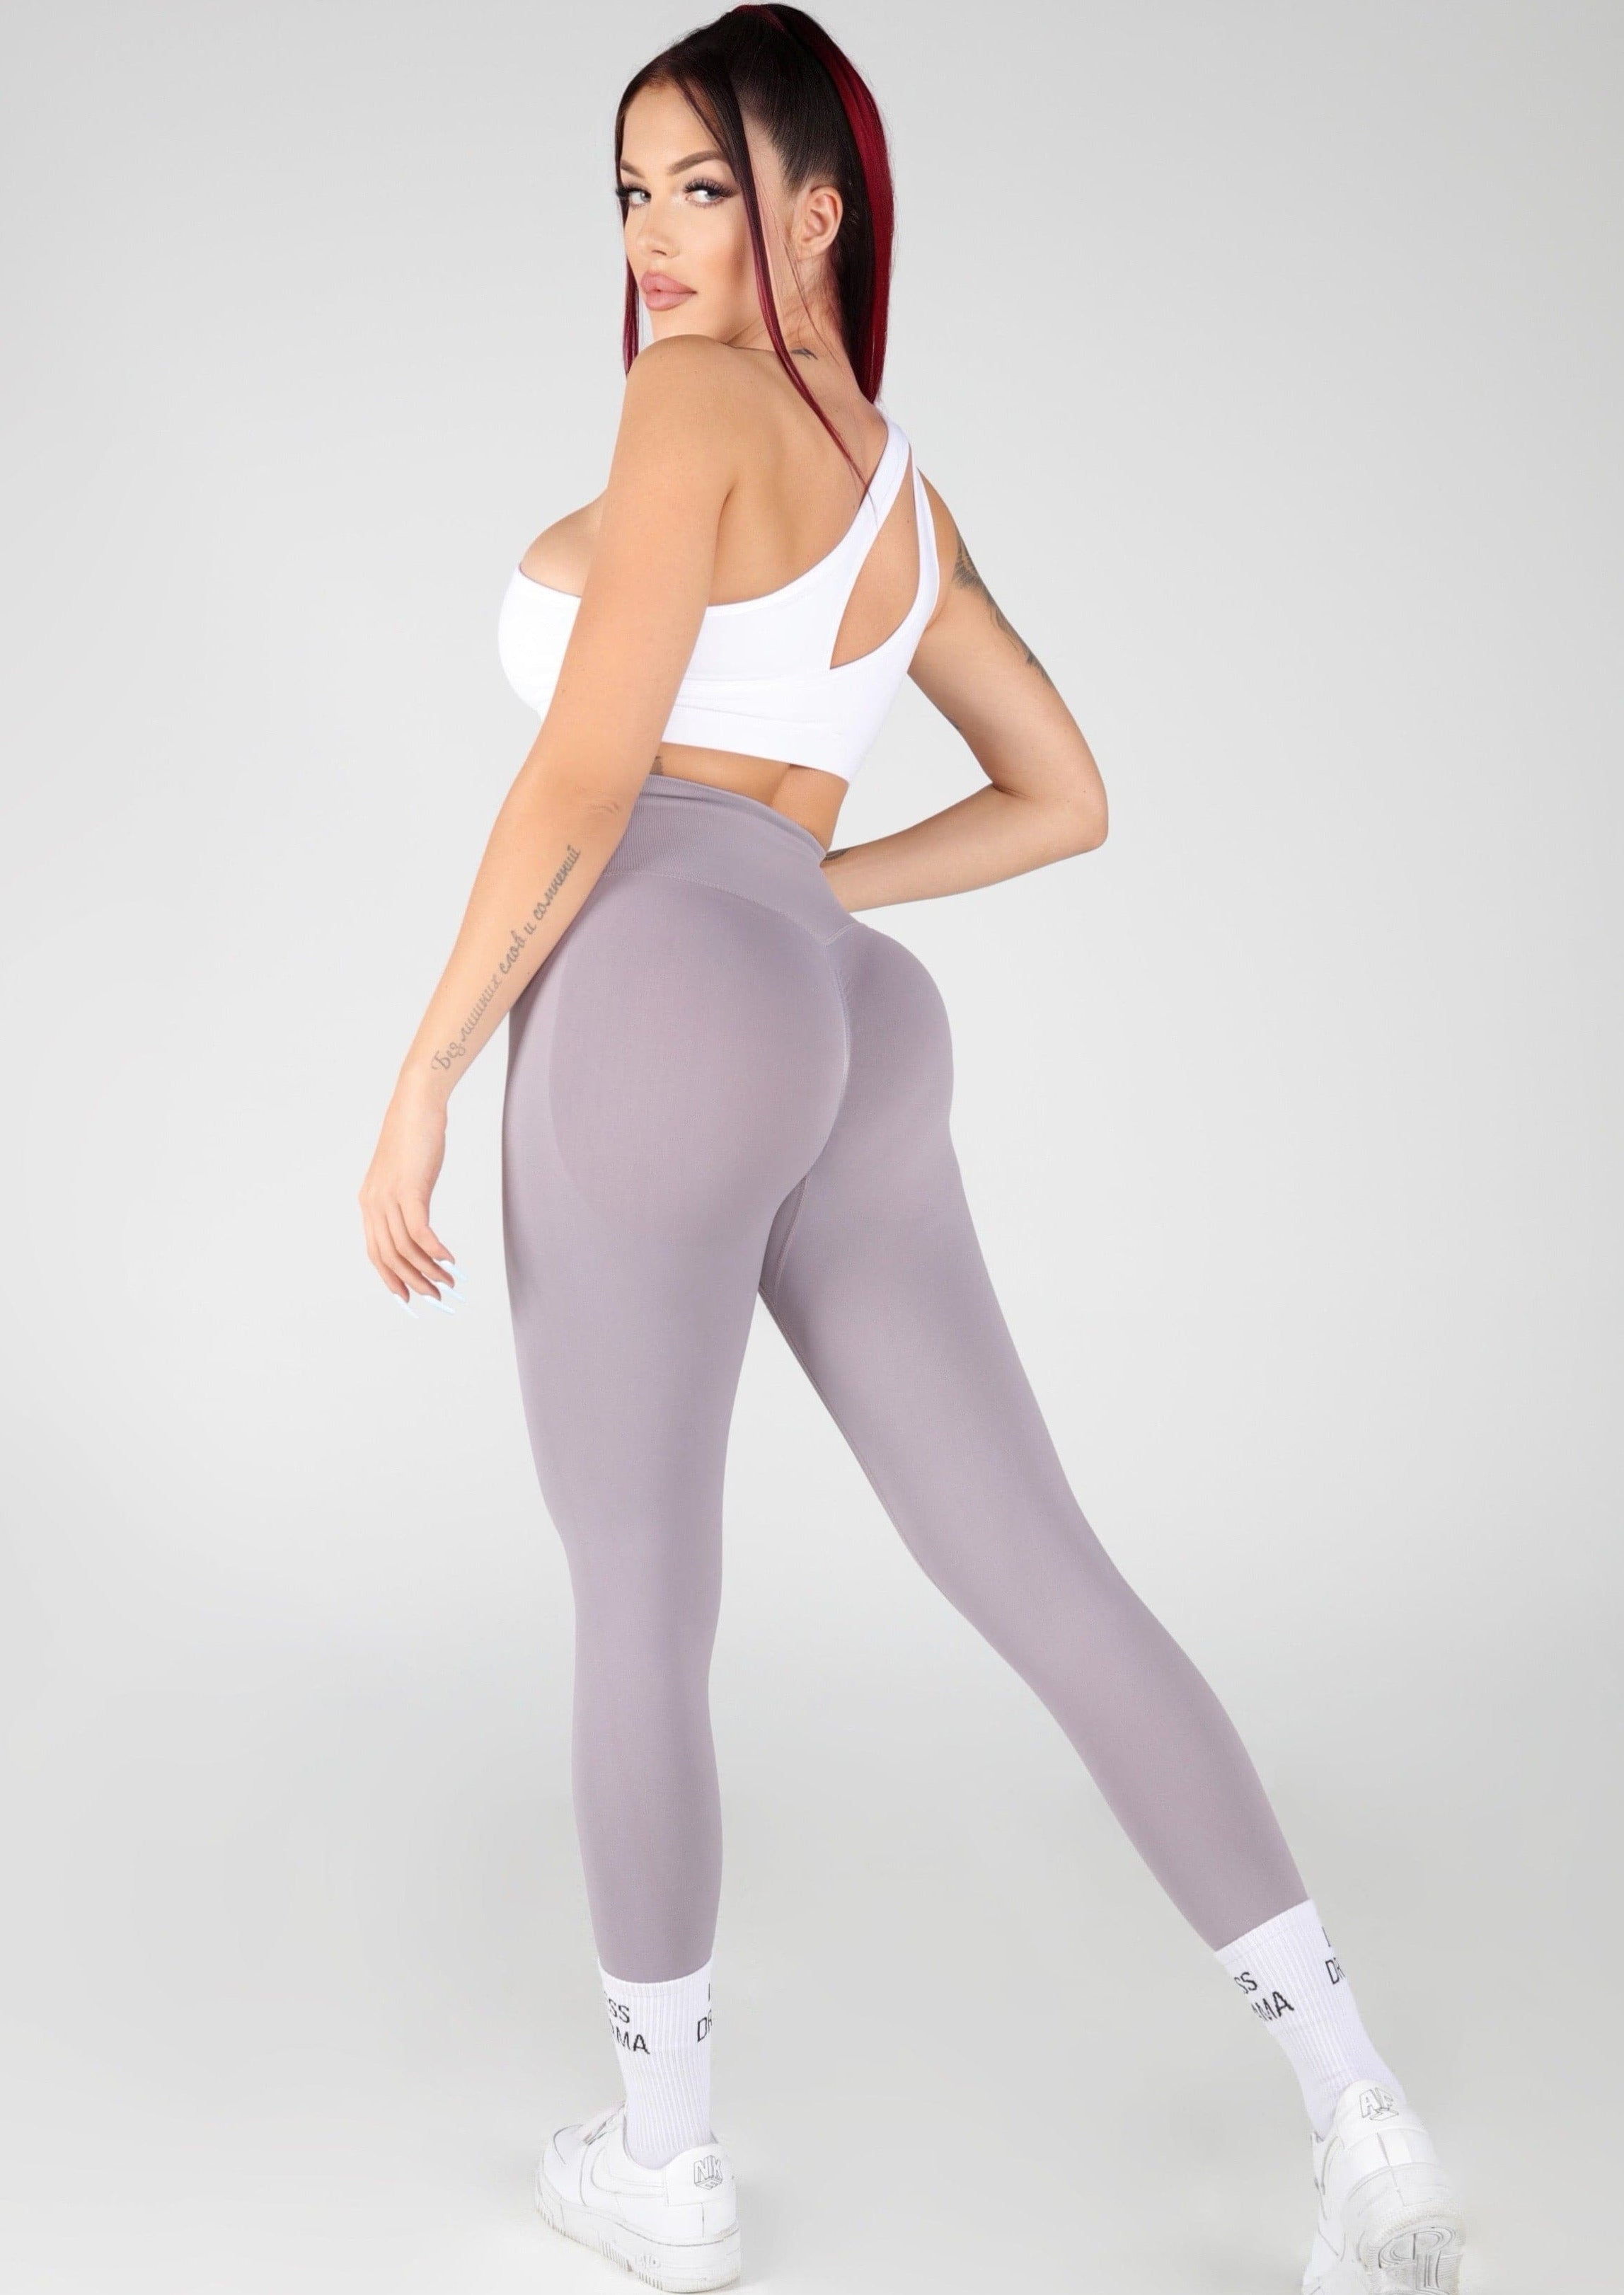 Bombshell Sportswear Sexy Back Leggings for Sale in North Miami